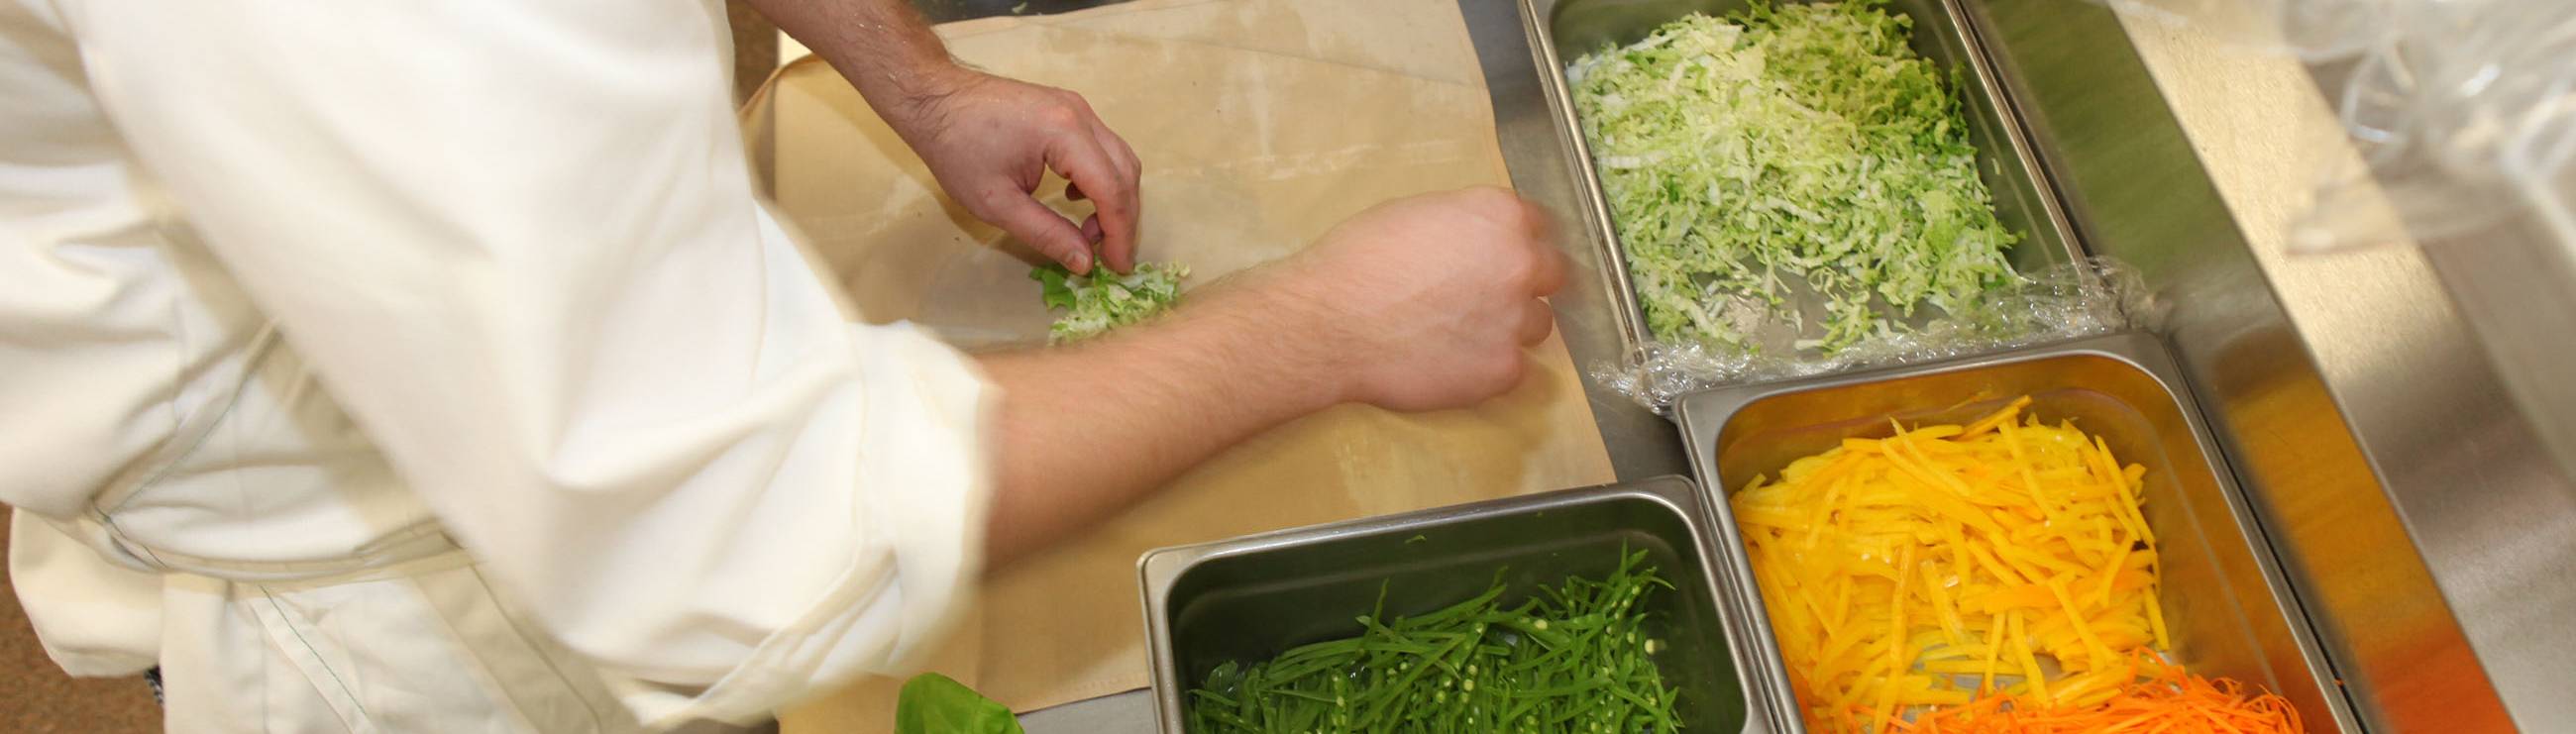 student preparing a dish with vegetables